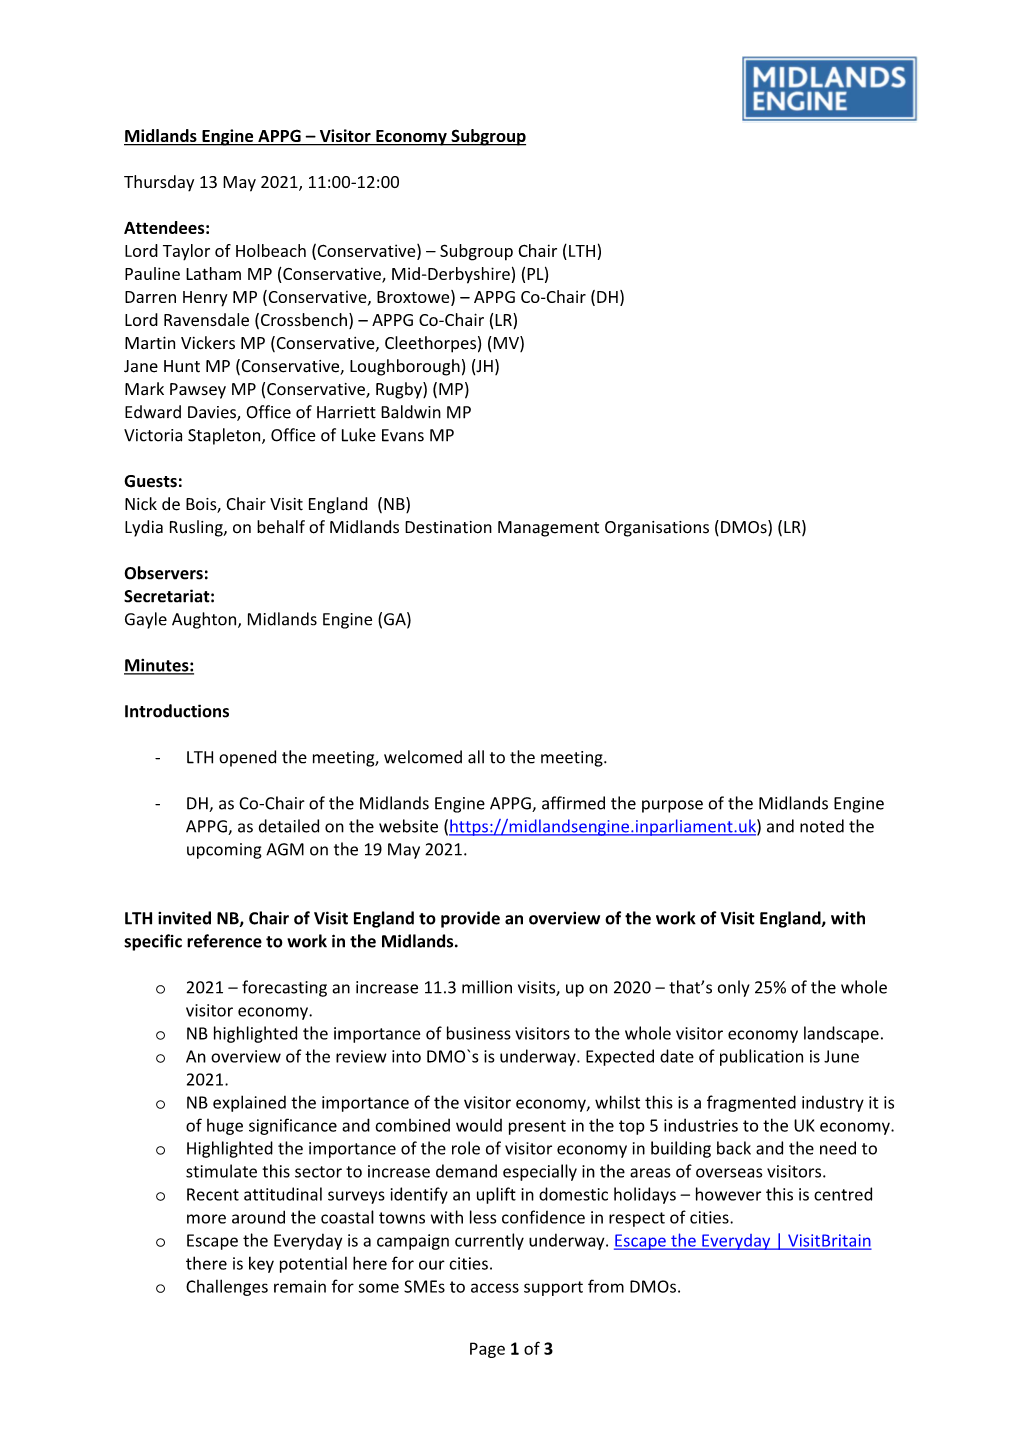 Page 1 of 3 Midlands Engine APPG – Visitor Economy Subgroup Thursday 13 May 2021, 11:00-12:00 Attendees: Lord Taylor of Holbea